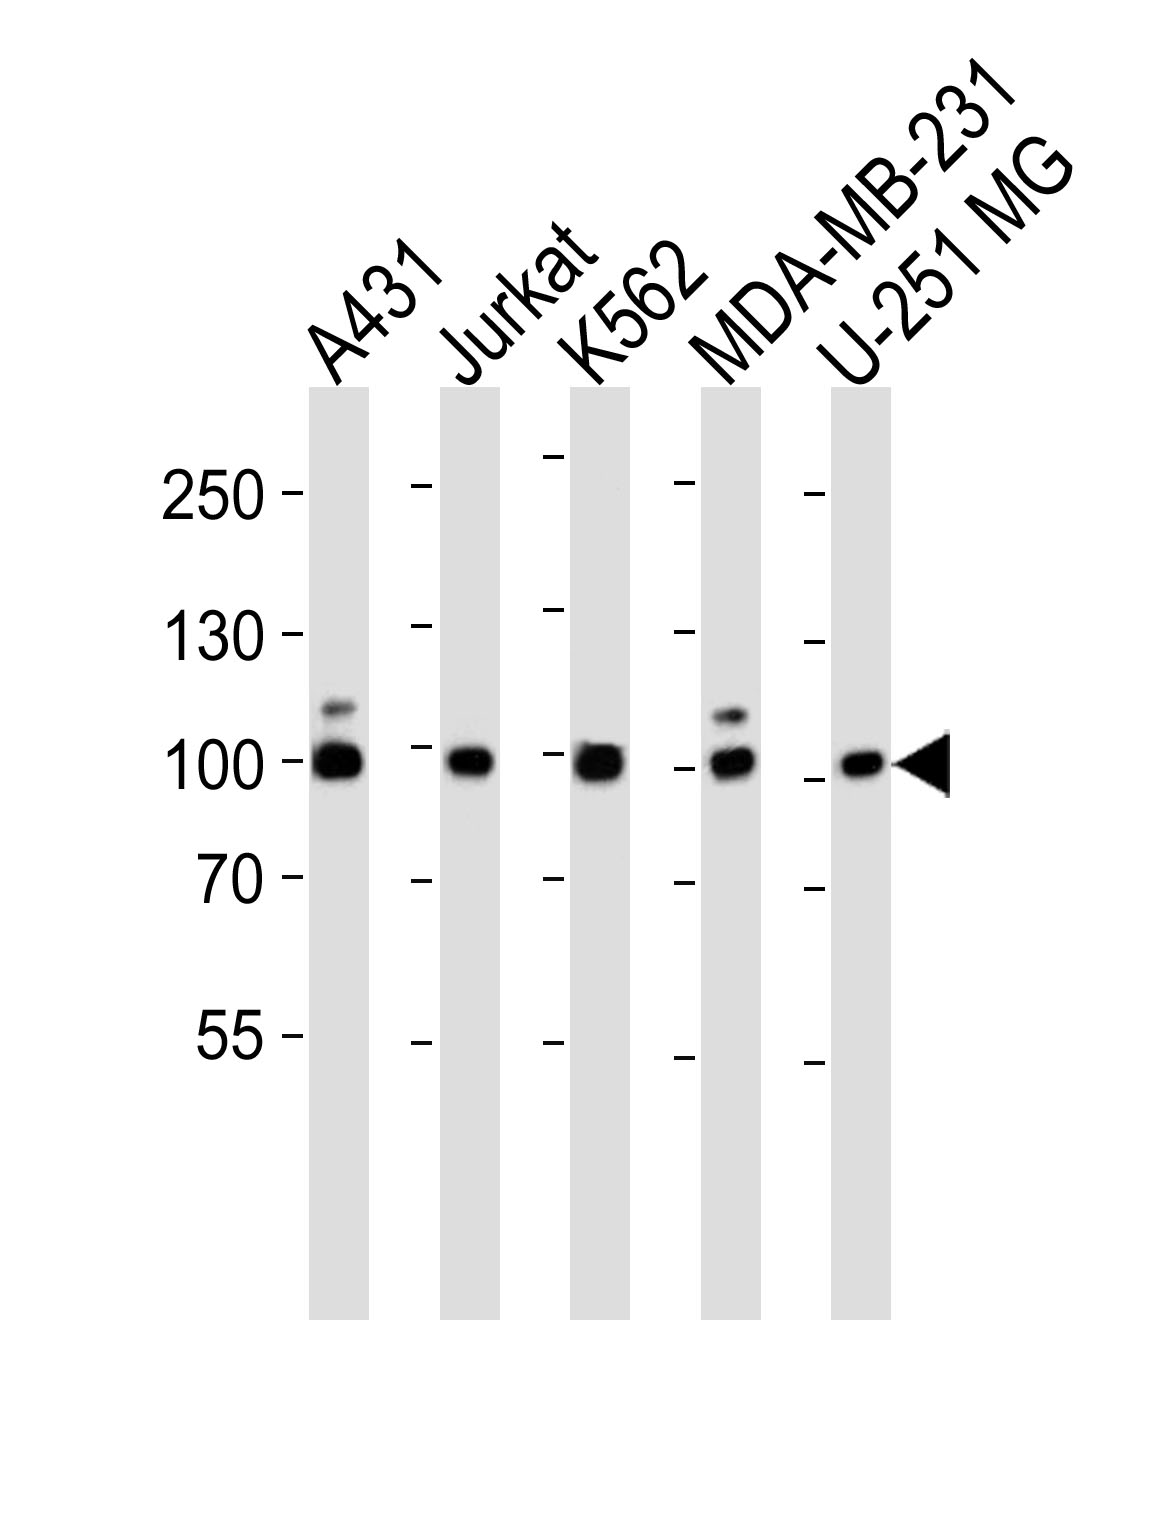 Western blot analysis of lysates from A431, Jurkat, K562, MDA-MB-231, U-251 MG cell line (from left to right), using ZNF175 Antibody (N-term) (Cat.  #AP20587a).  AP20587a was diluted at 1:1000 at each lane.  A goat anti-rabbit IgG H&L(HRP) at 1:5000 dilution was used as the secondary antibody. Lysates at 35ug per lane.